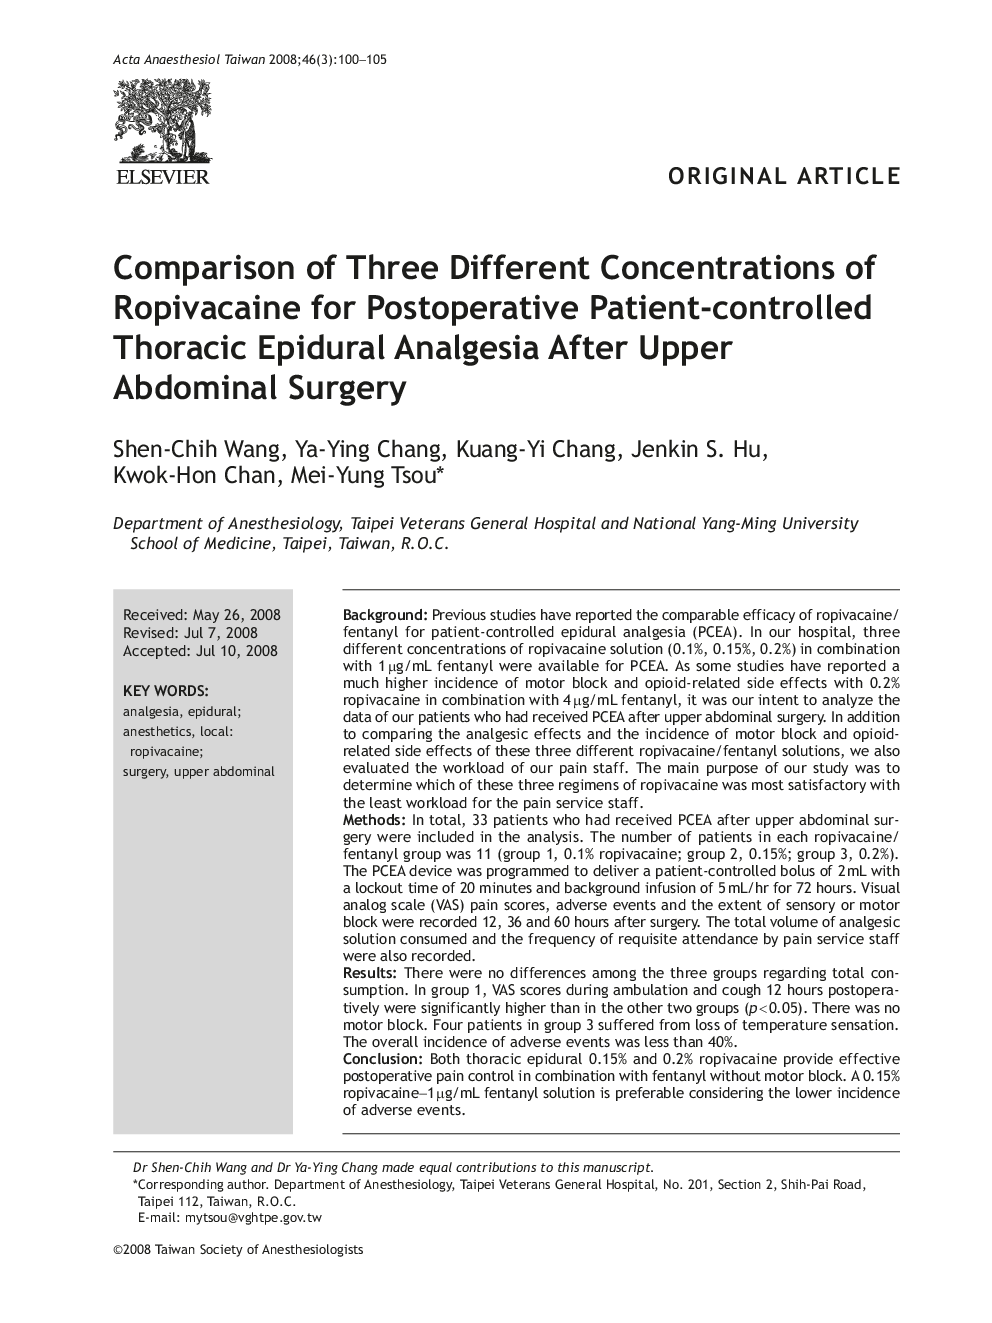 Comparison of Three Different Concentrations of Ropivacaine for Postoperative Patient-controlled Thoracic Epidural Analgesia After Upper Abdominal Surgery